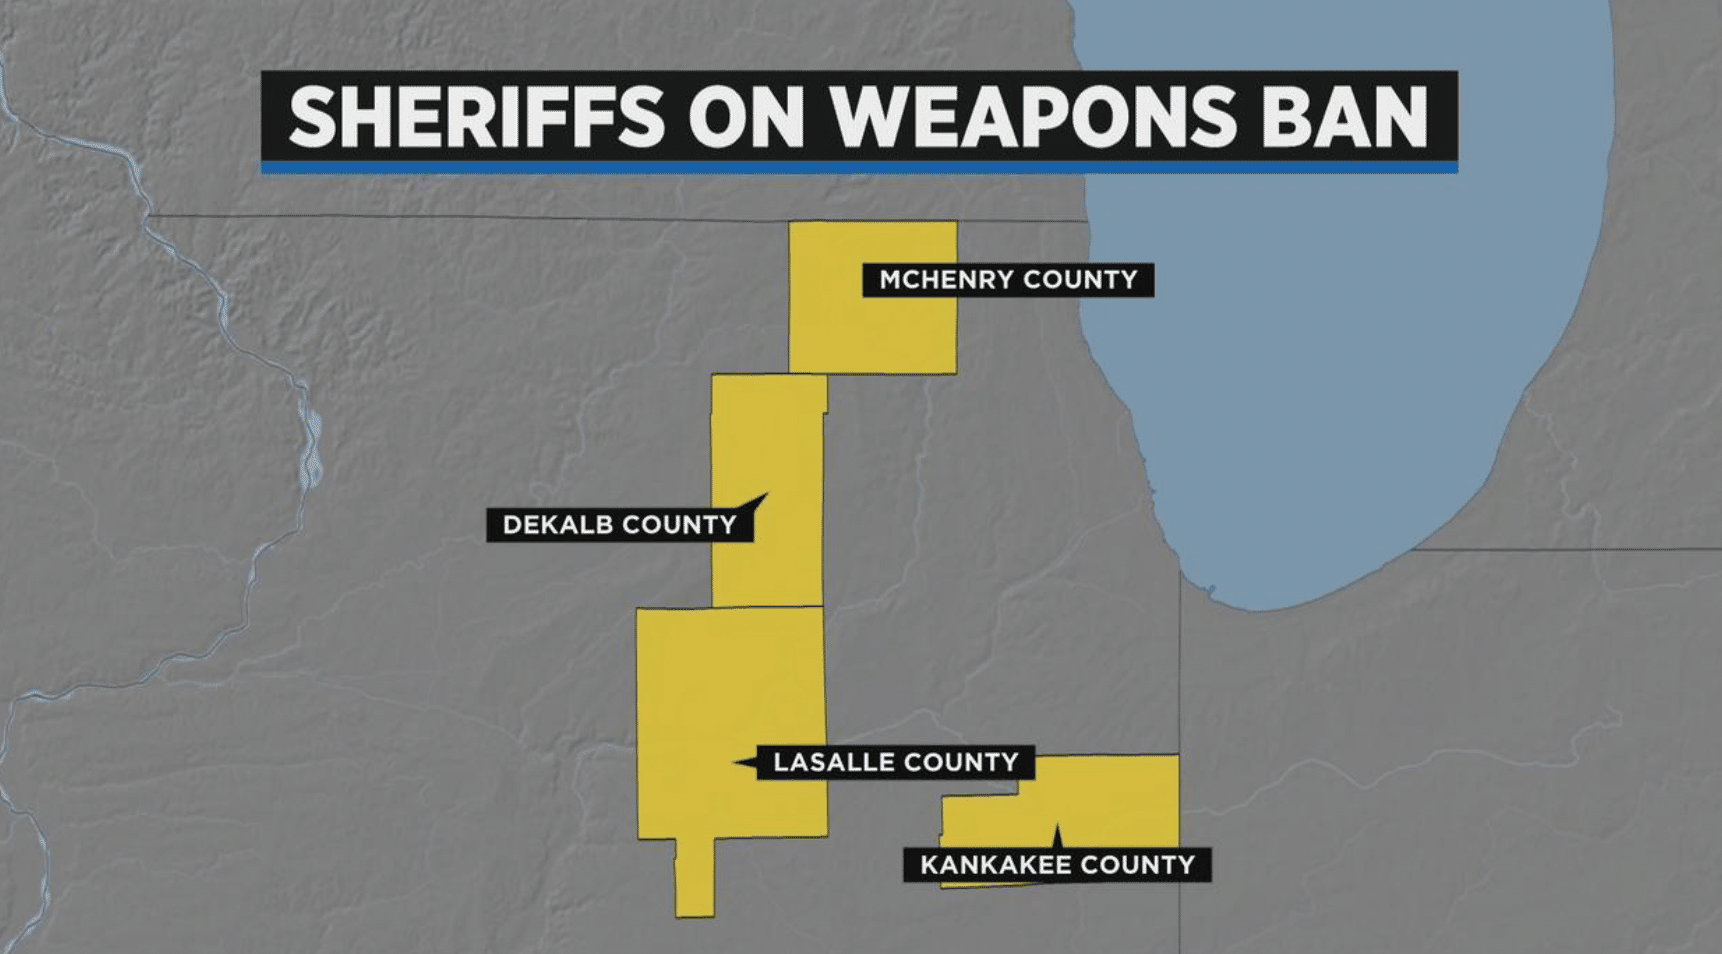 This week, sheriffs across Illinois announced that they will not enforce the new law, called the Protect Illinois Communities Act, banning AR-15s and